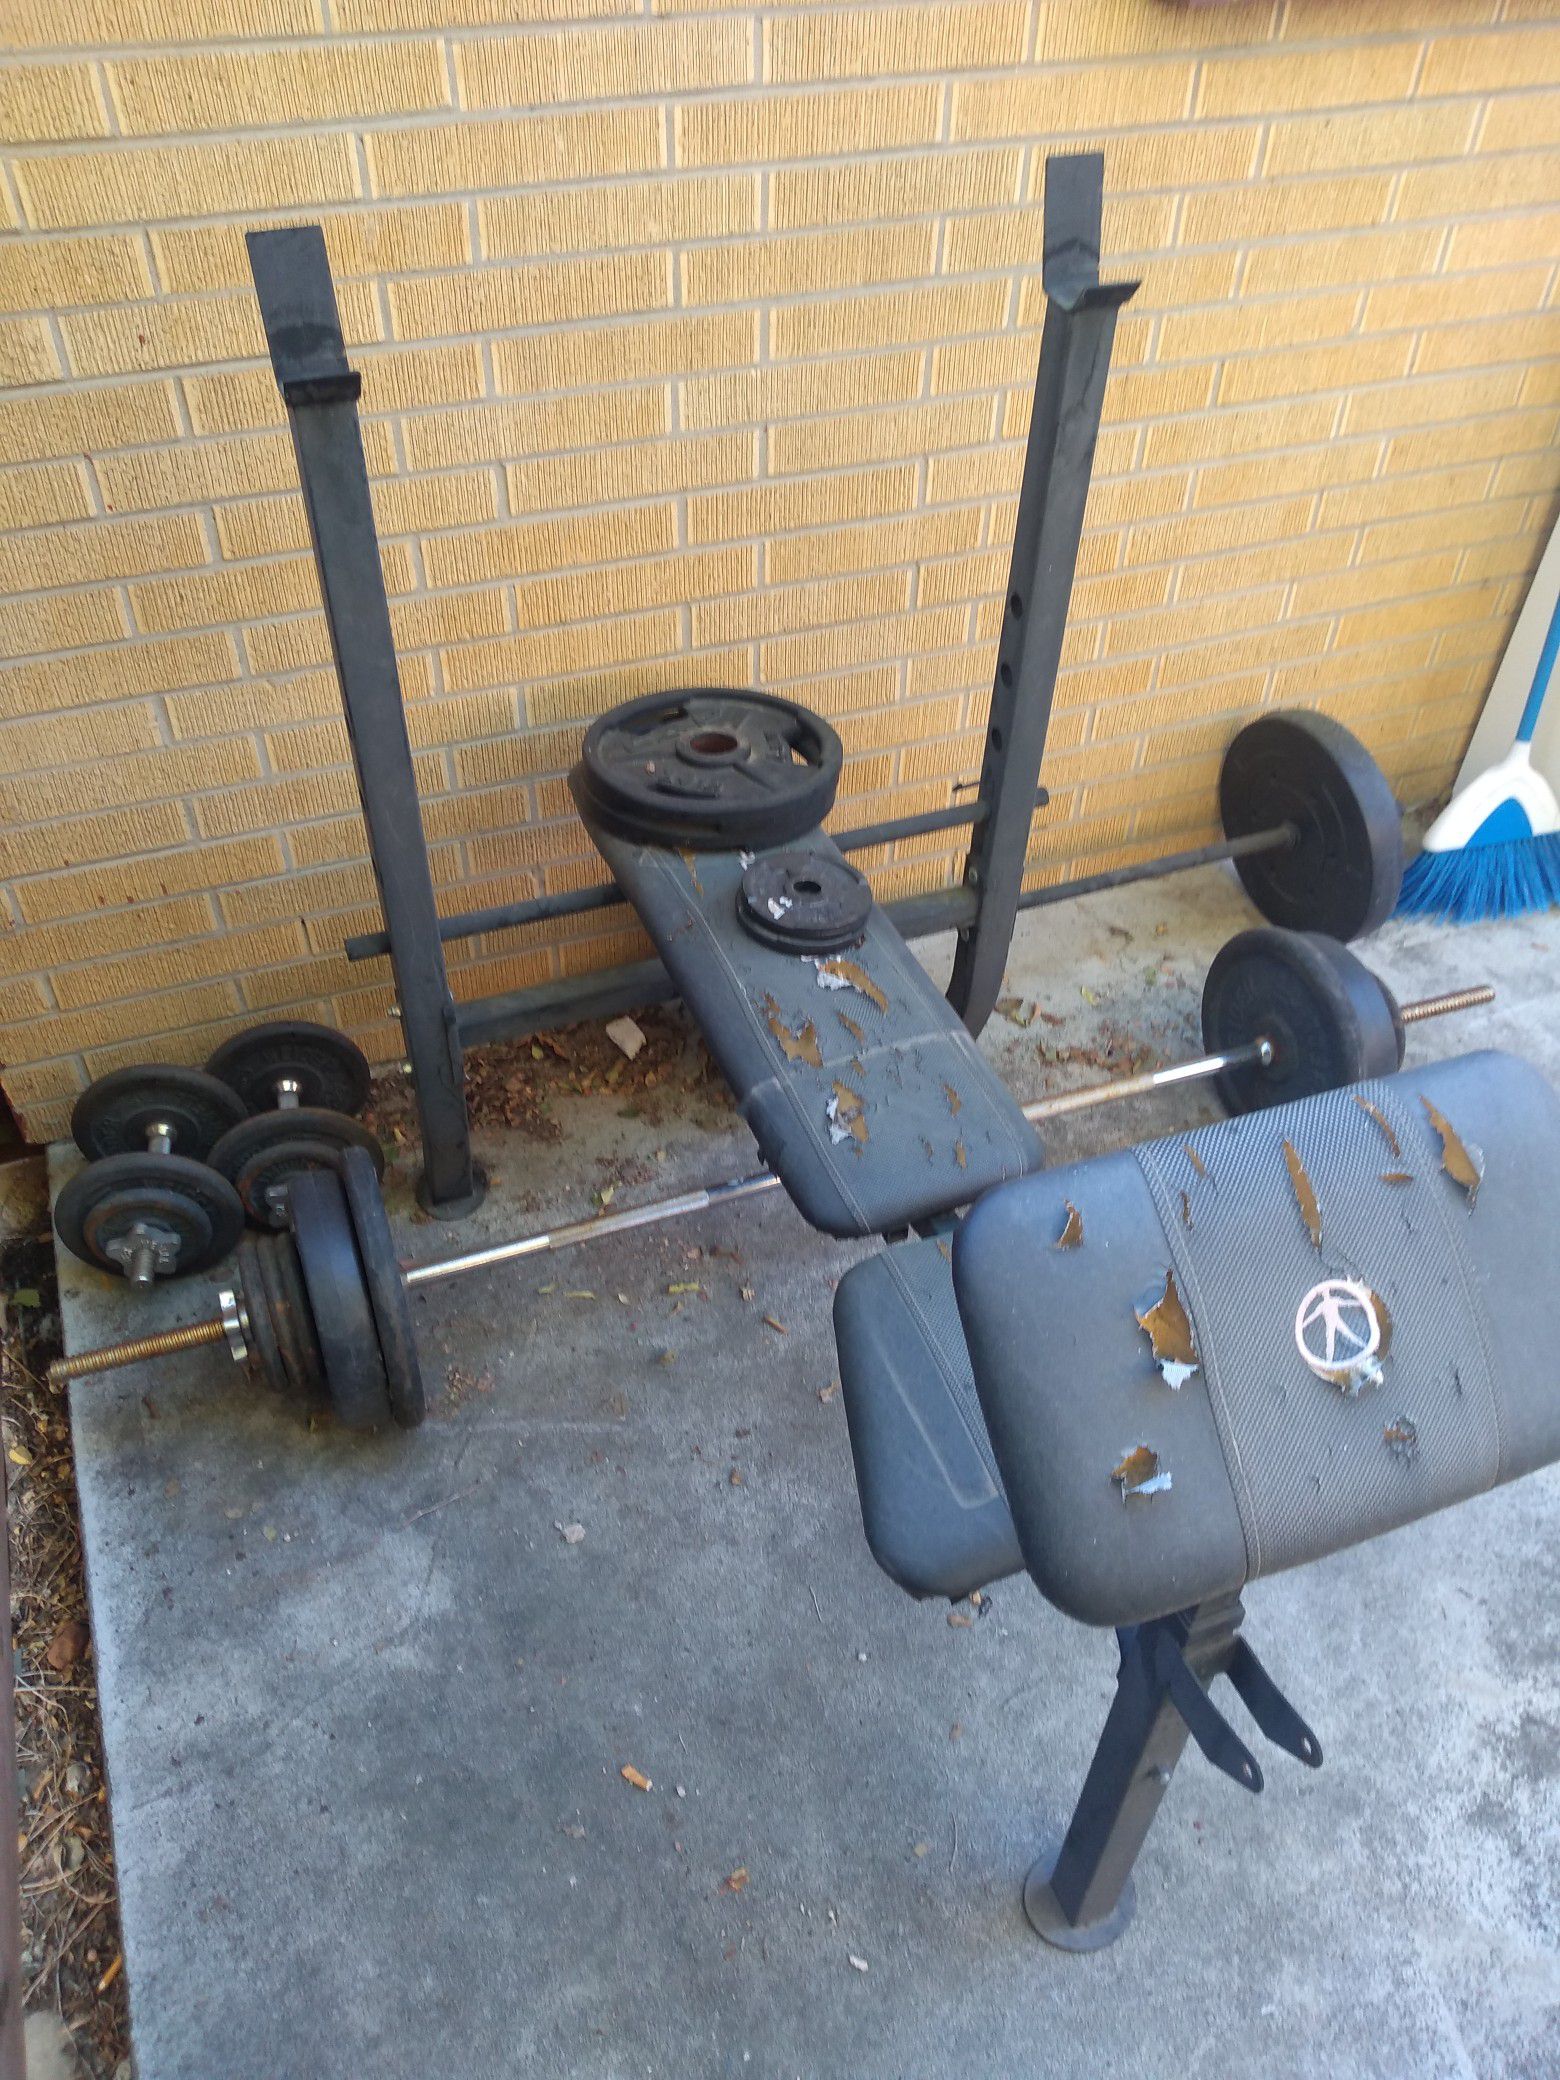 Weight set and bench